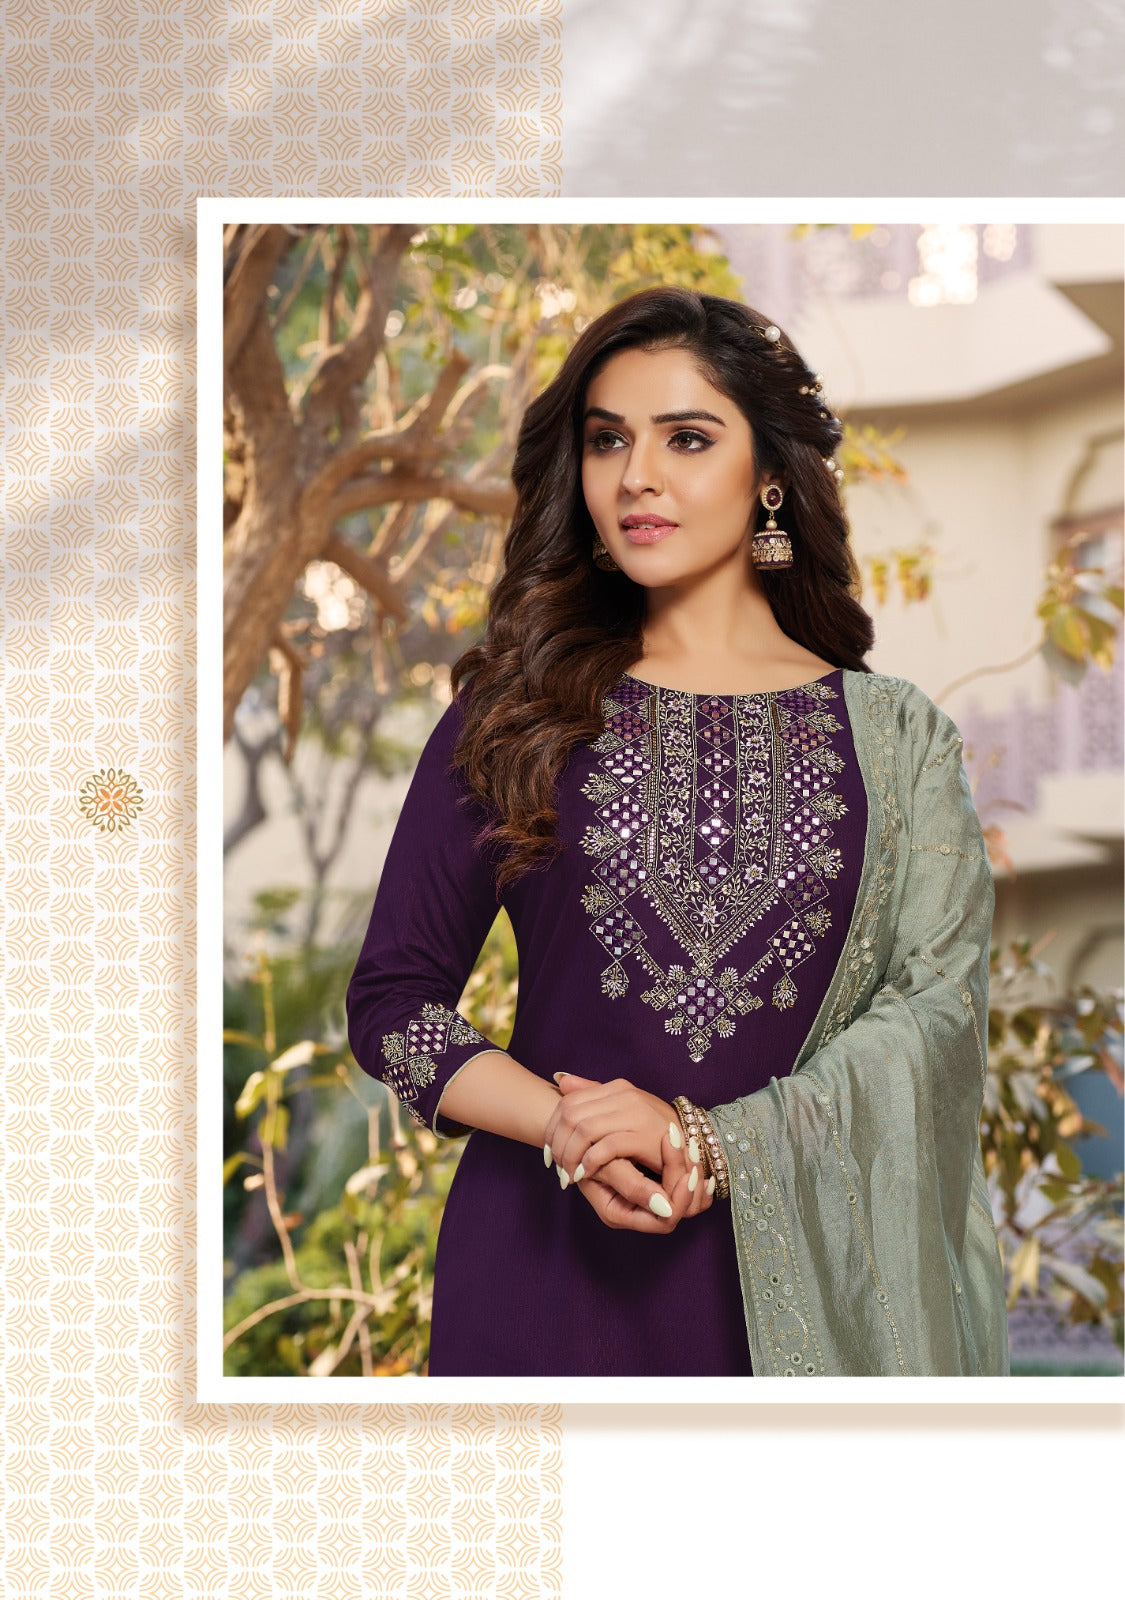 Kashish Vol 5 Ladies Flavour Rayon Readymade Pant Style Suits